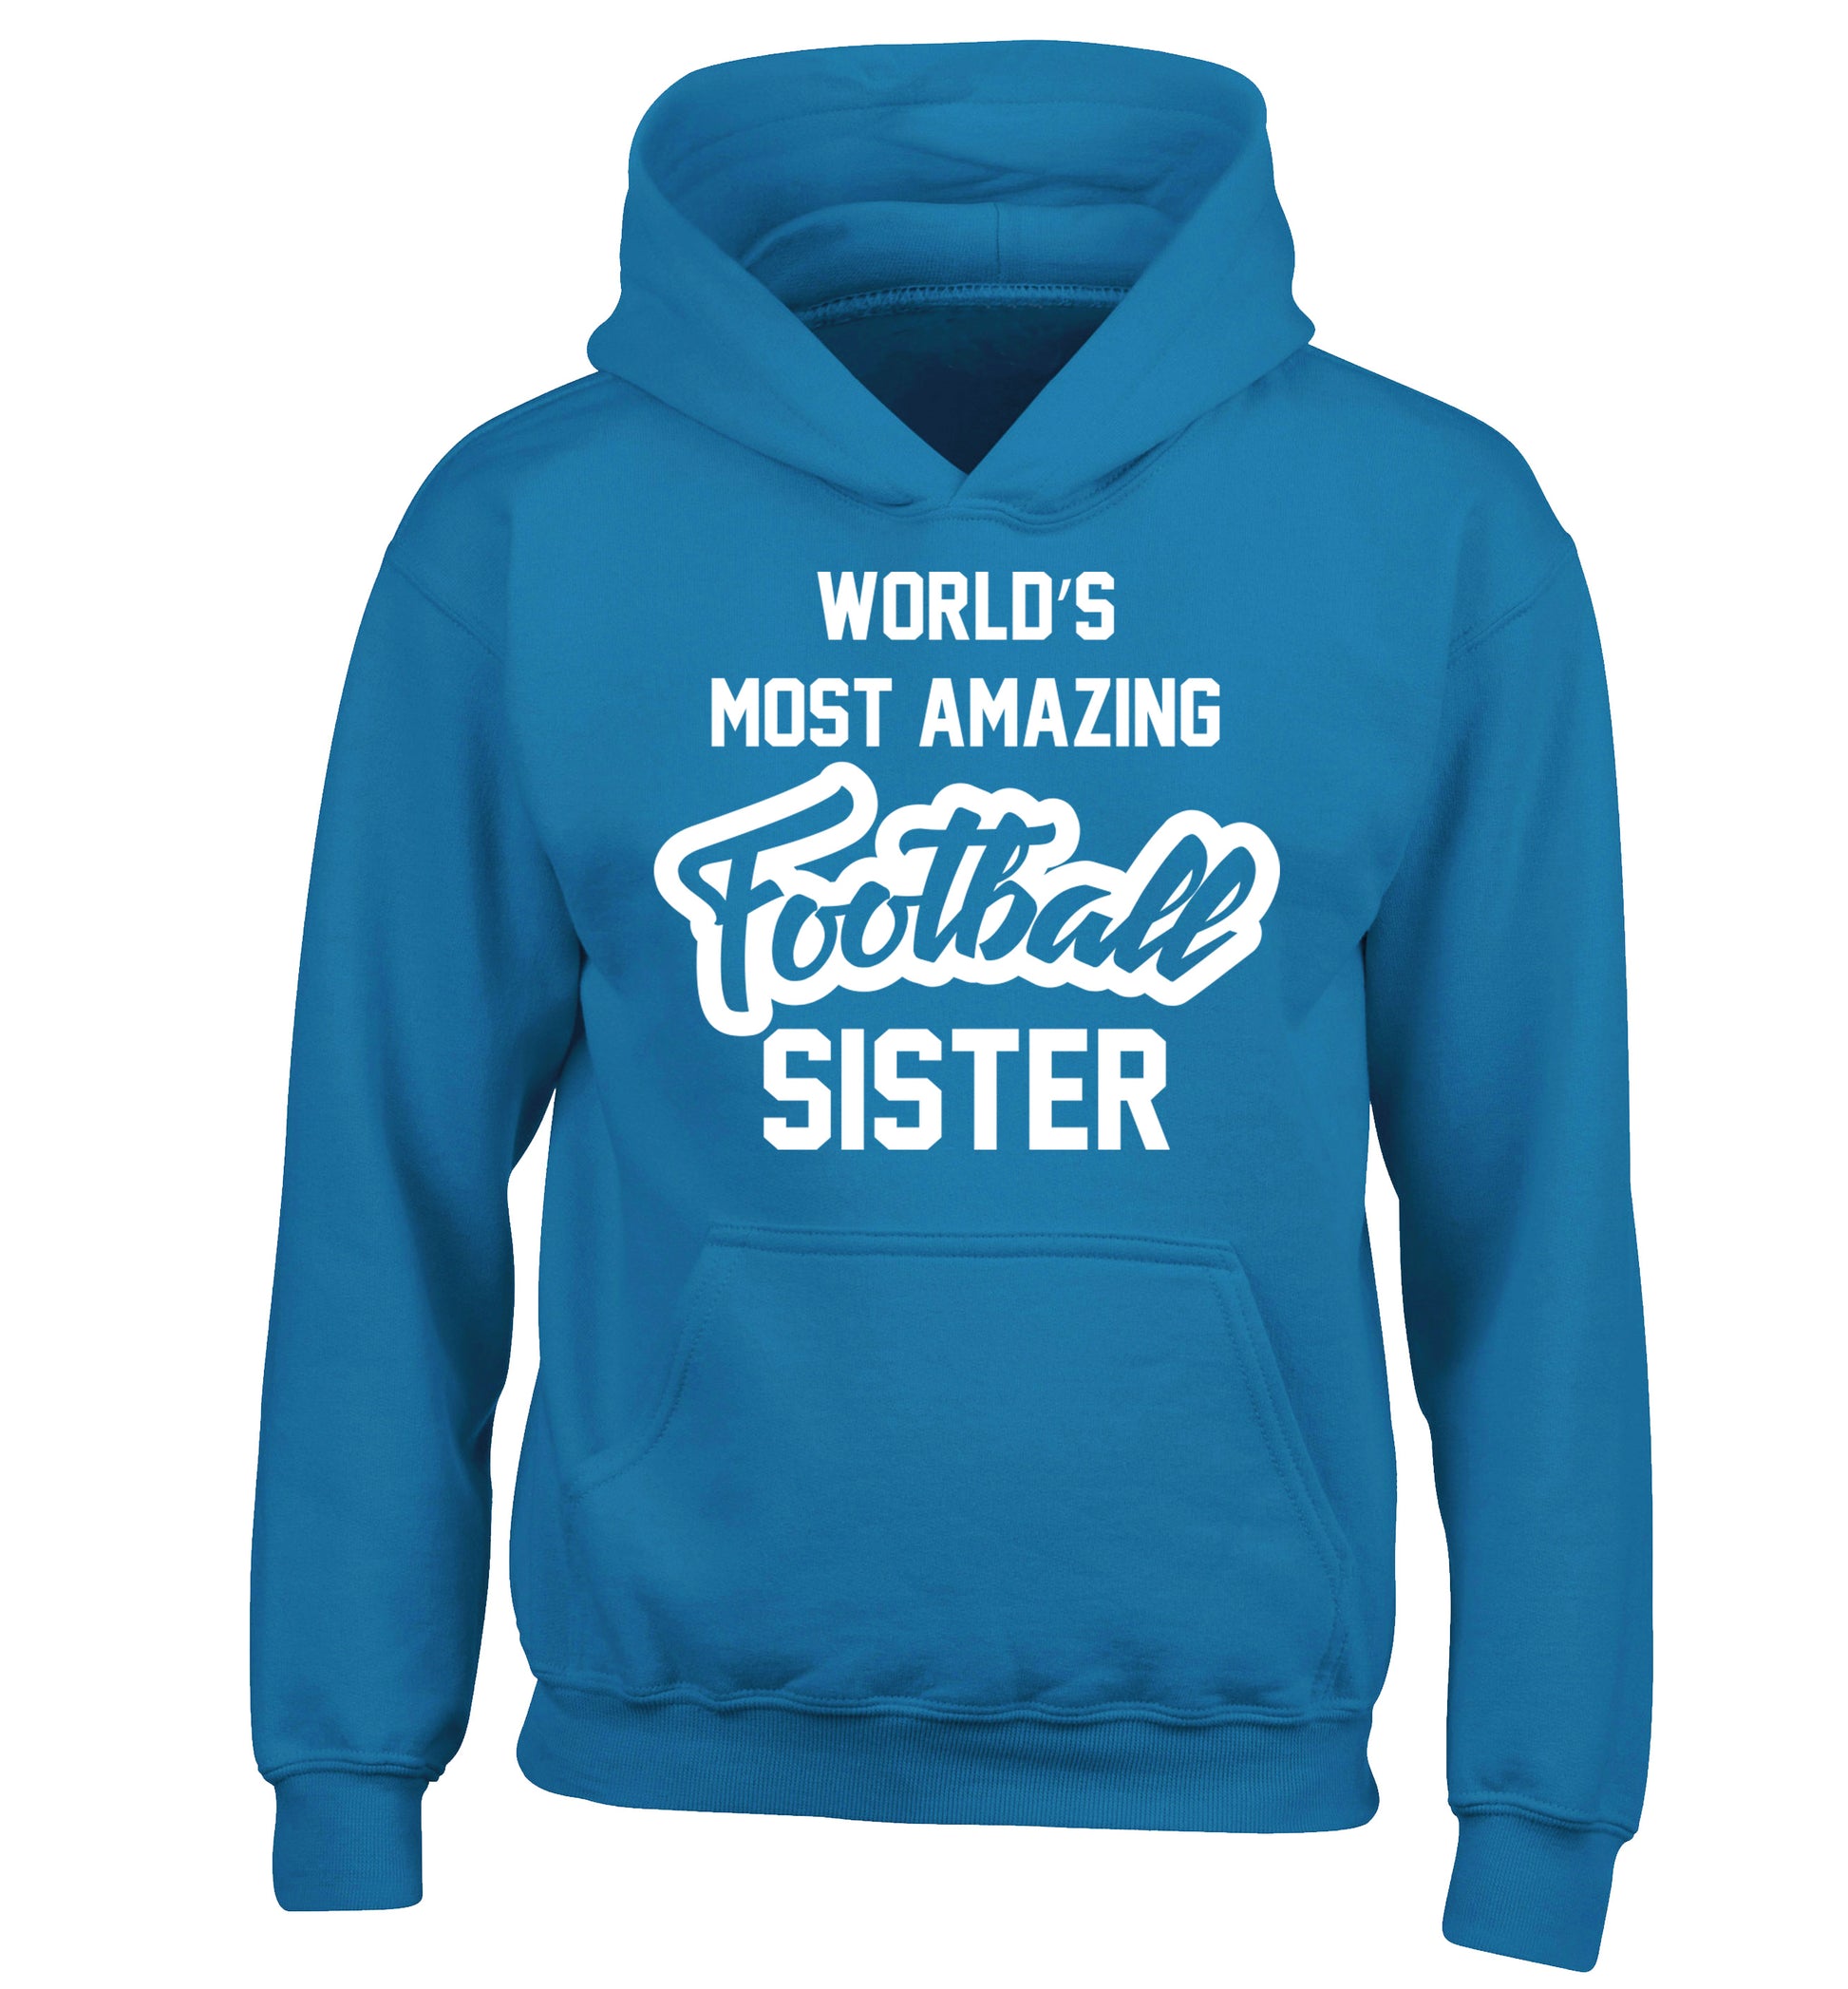 Worlds most amazing football sister children's blue hoodie 12-14 Years